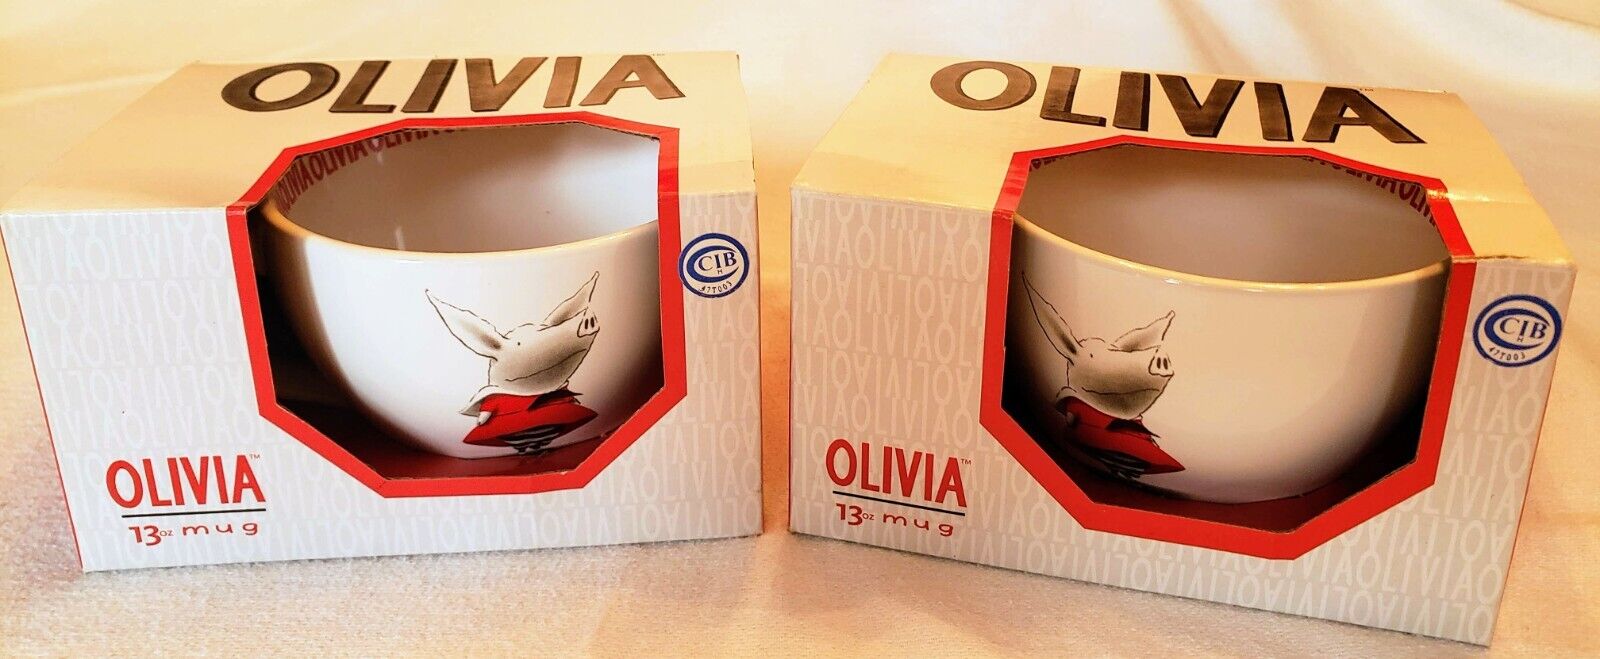 Olivia the Pig 2002 Collectable Tea Cups- 2 New in Original Boxes